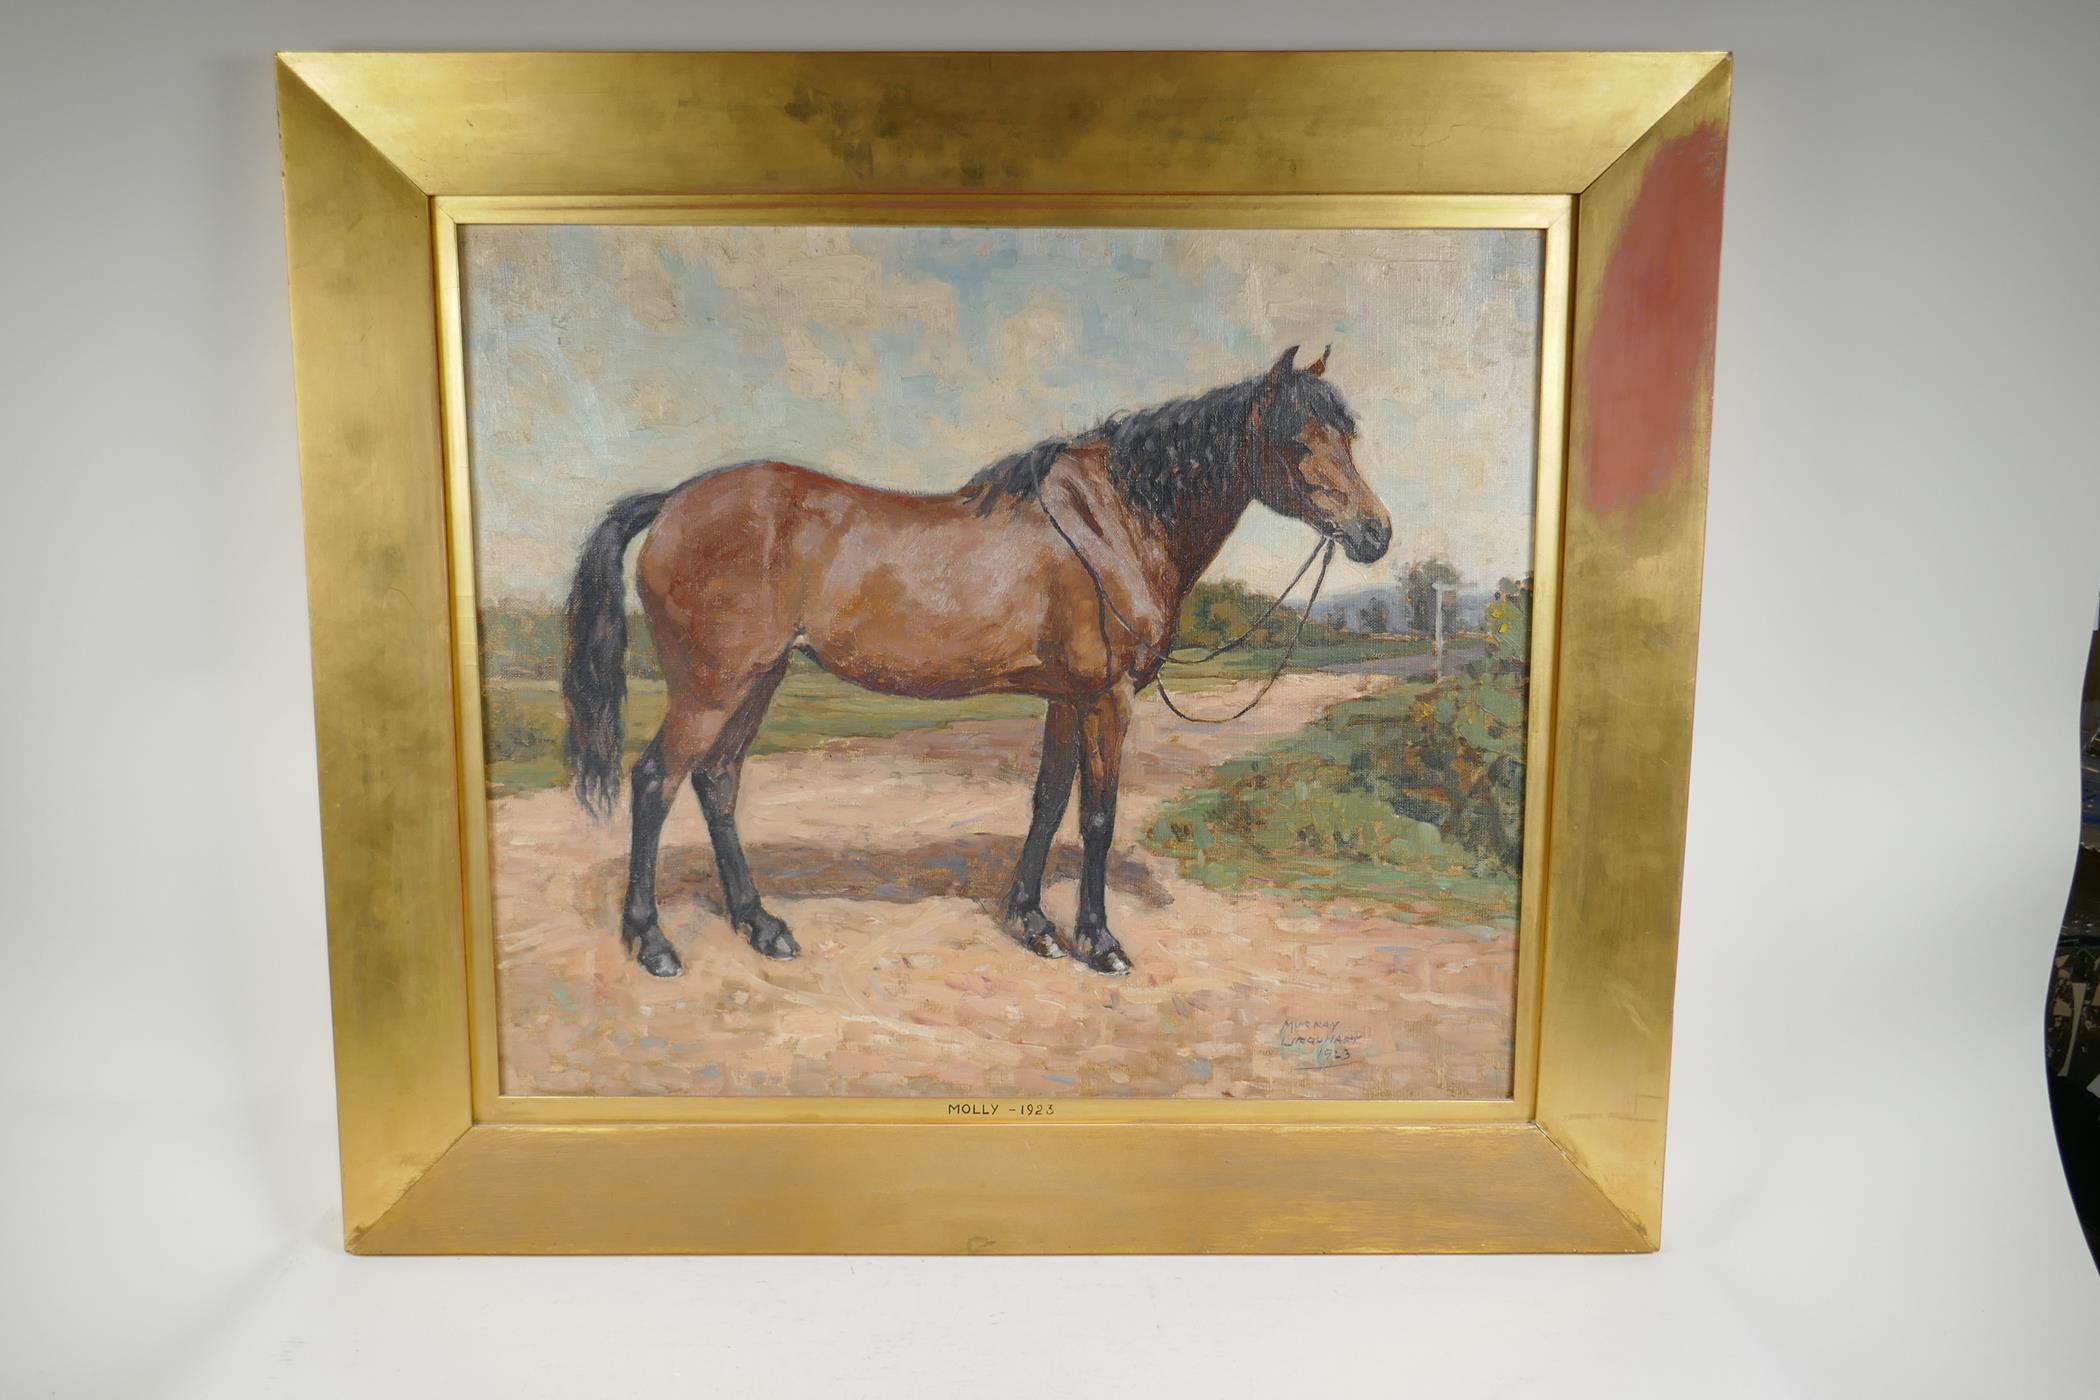 Murray McNeal Caird Urquhart, Scottish, Molly-1923, study of a horse, oil on canvas, 24" x 20" - Image 2 of 5